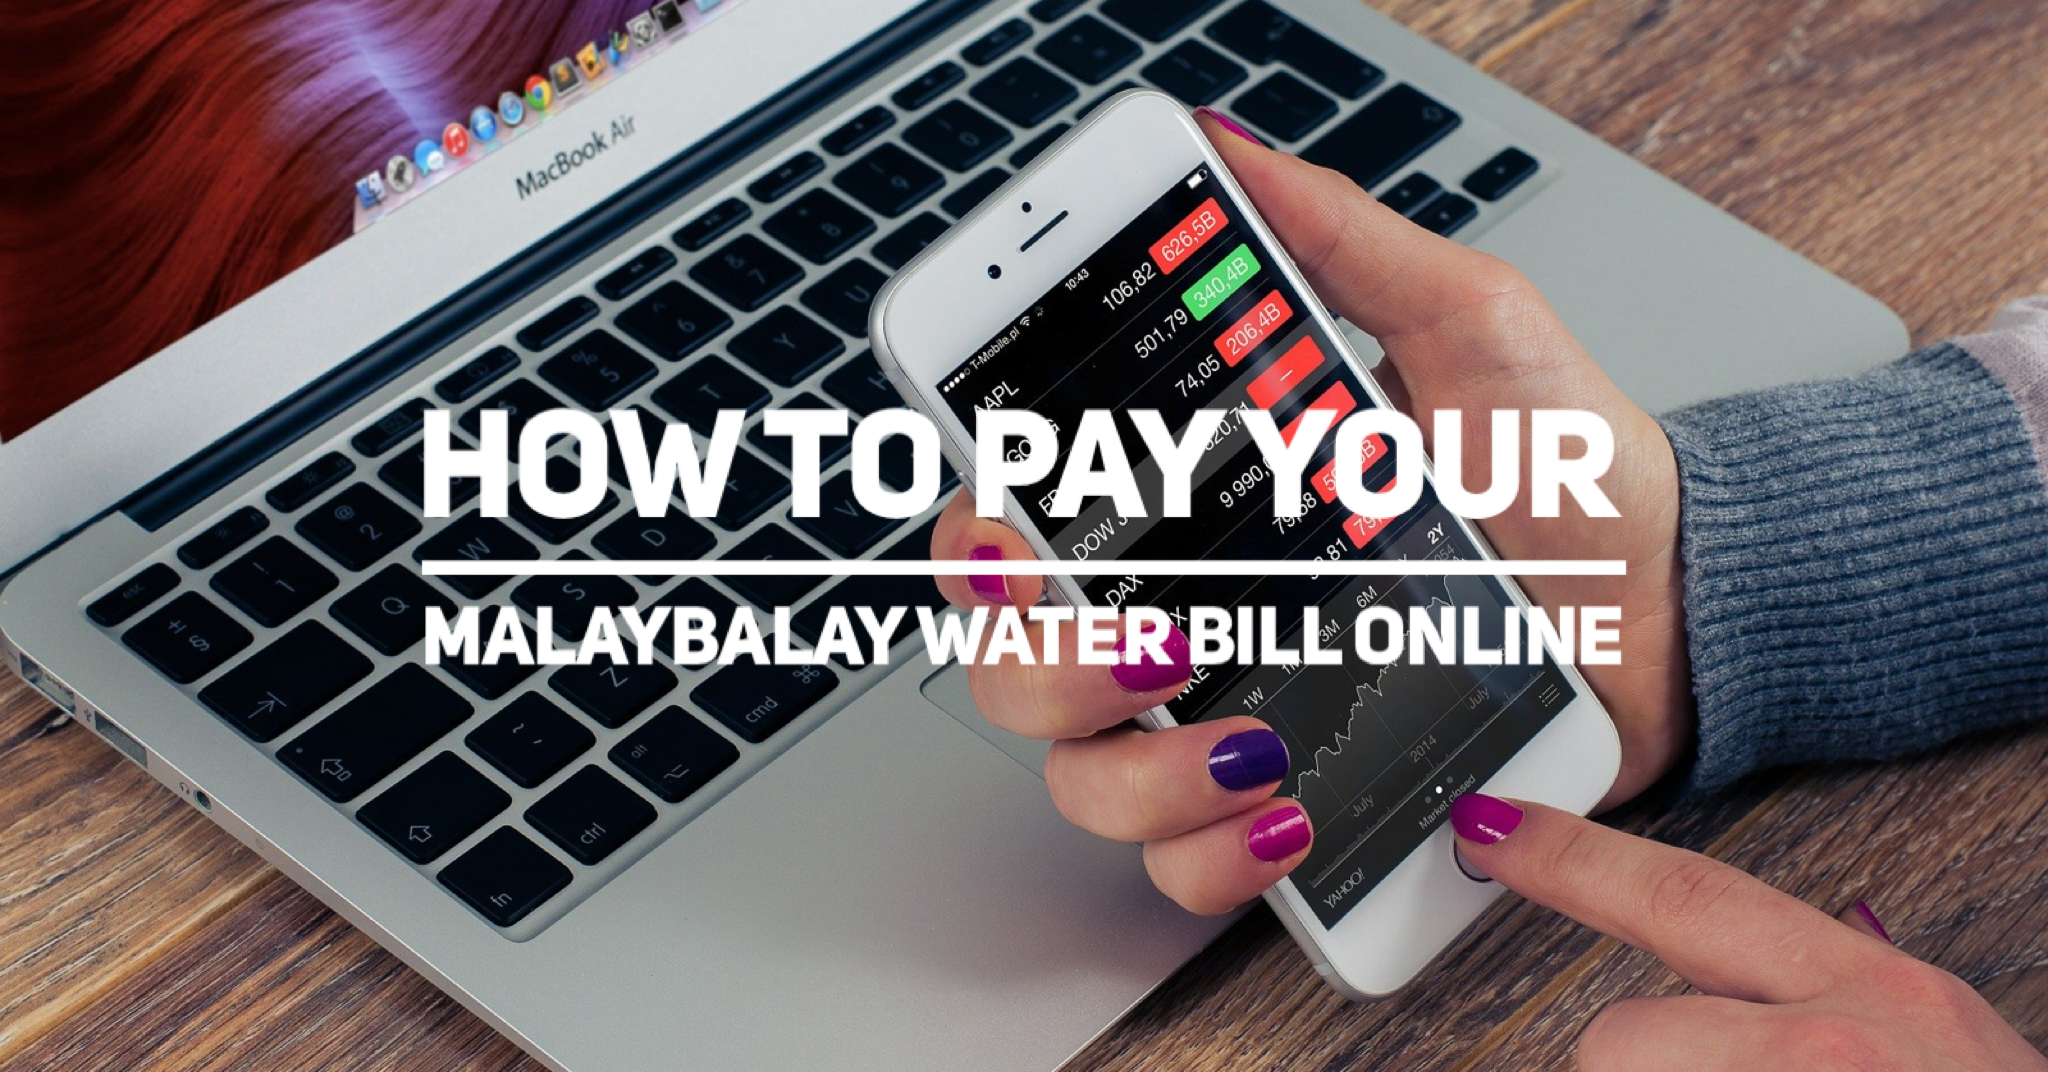 How to pay your Malaybalay water bill online